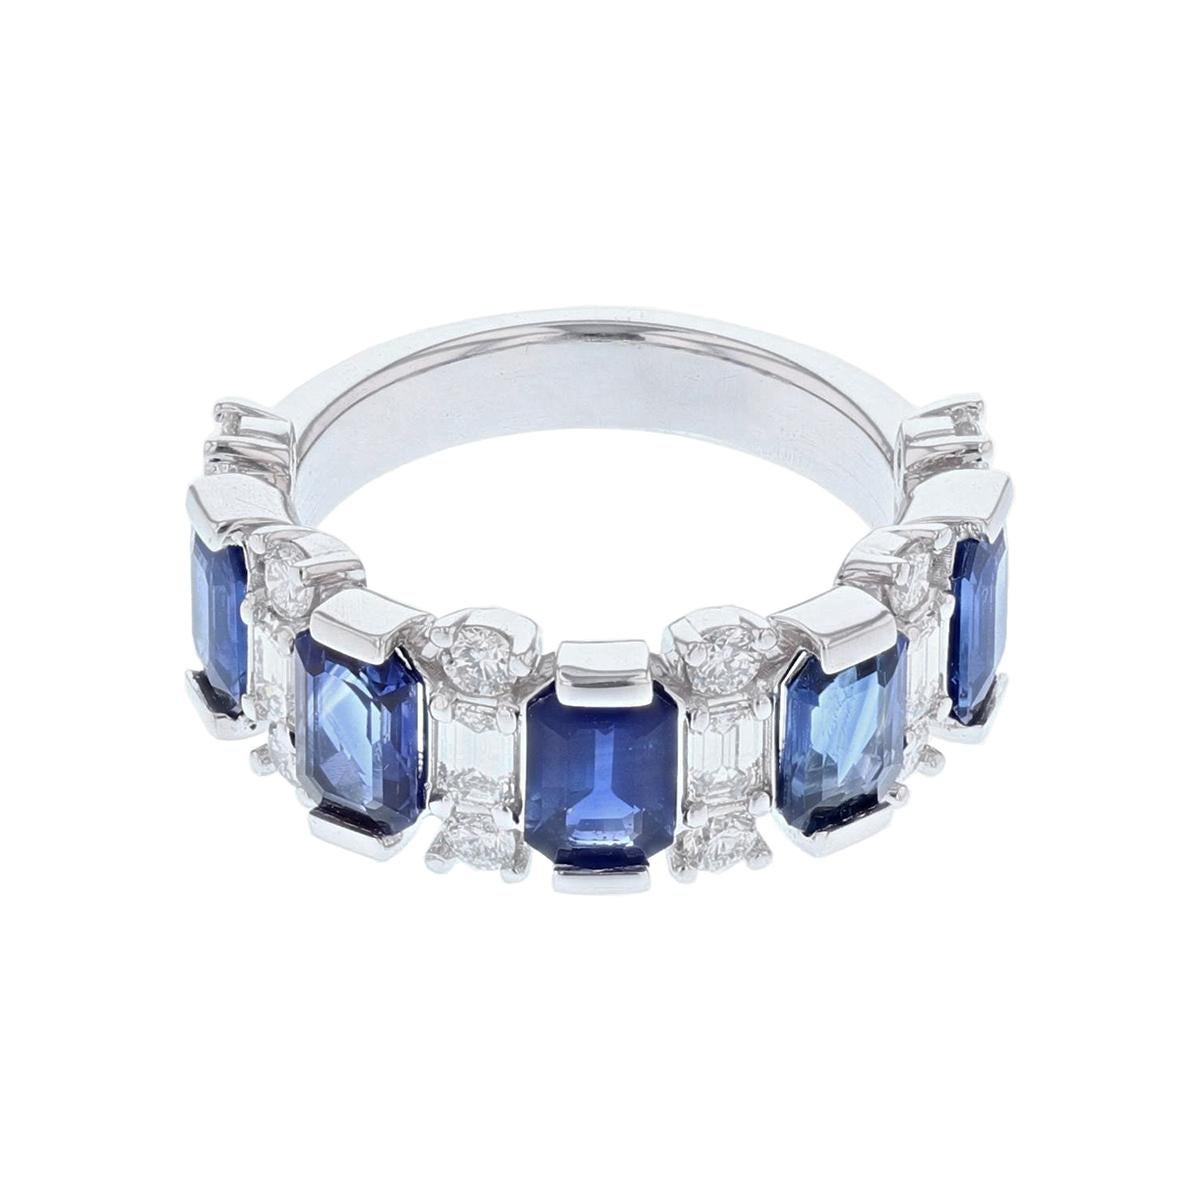 This ring is made in 14 karat white gold featuring five Emerald cut, channel set Blue Sapphires weighing 2.94 carats and six Emerald cut, channel set Diamonds weighing 0.59 carats with a color grade (H/I) and a clarity grade (VS). 